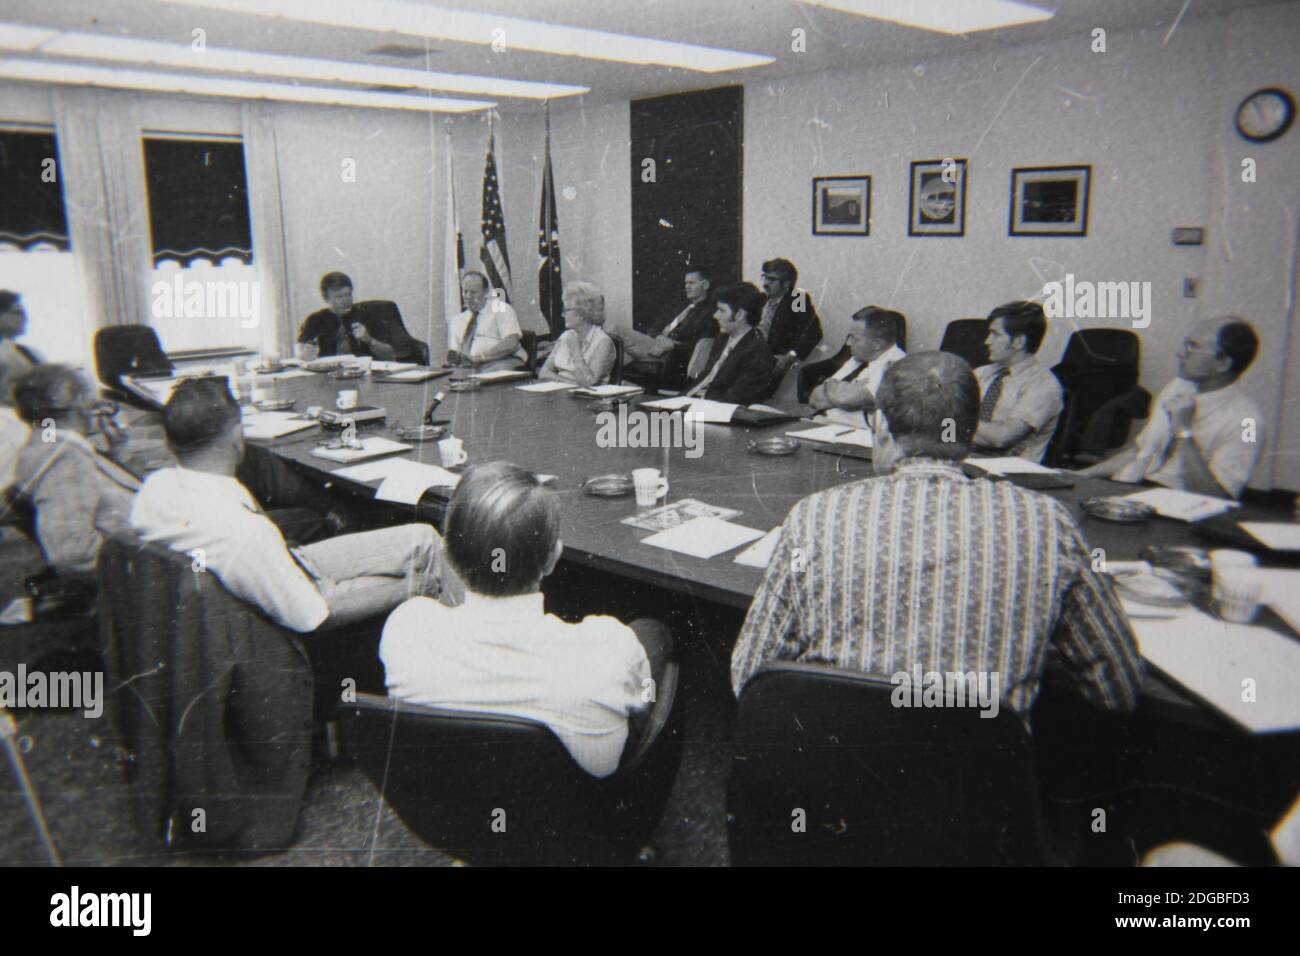 Fine 1970s vintage black and white photography of a business meeting full of white collar professionals in a huge conference room. Stock Photo